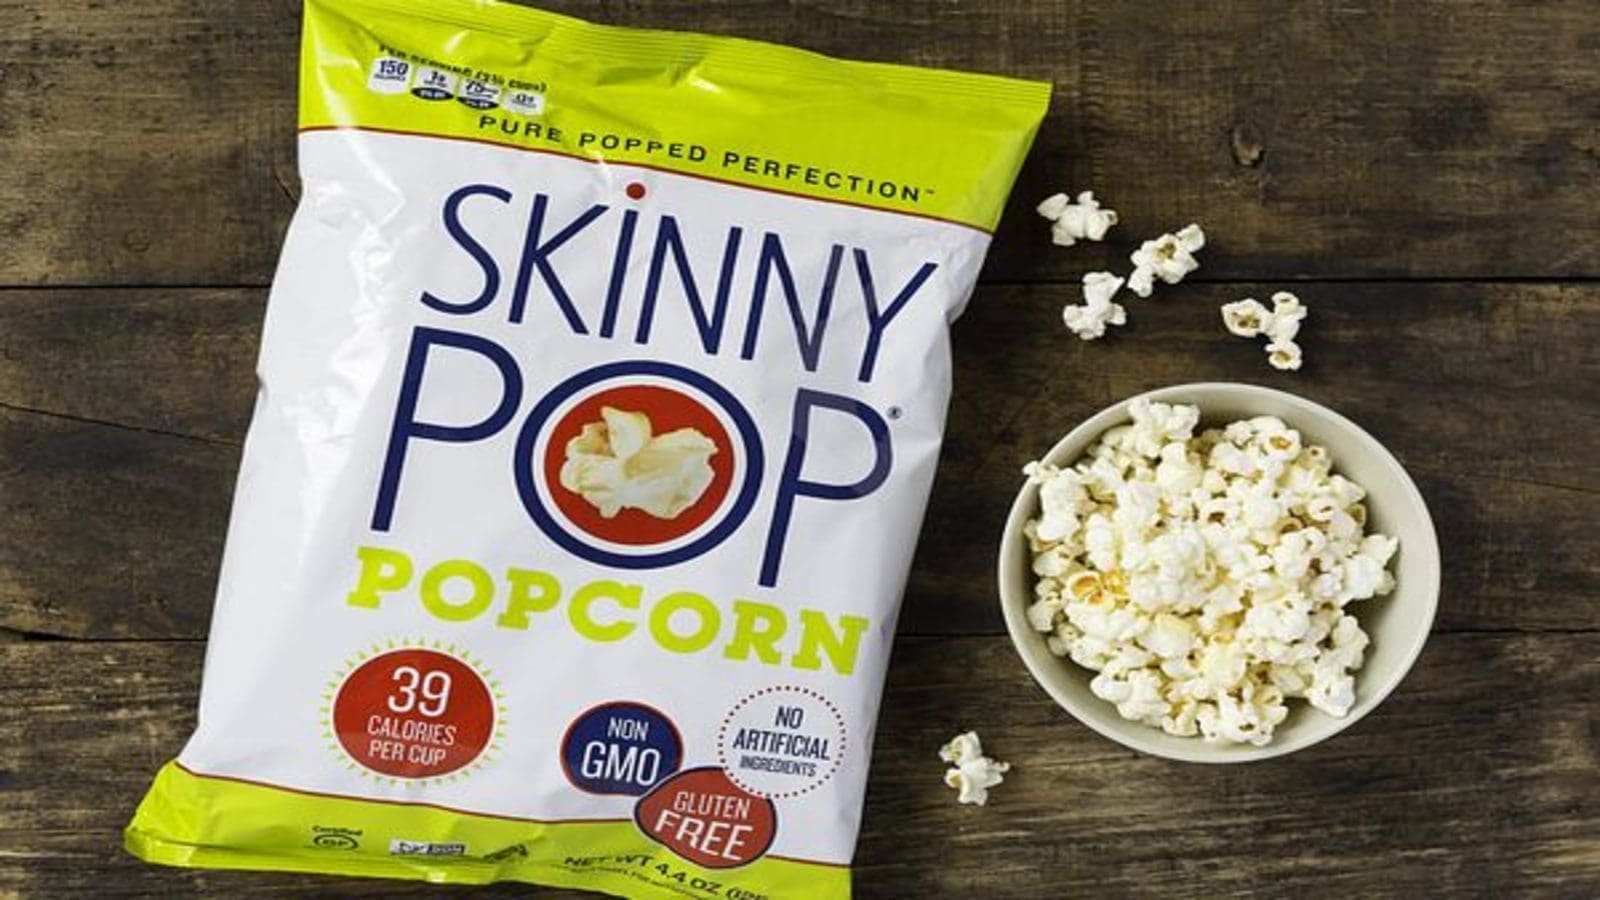 Hershey in $1.6 billion deal to acquire SkinnyPop parent Amplify